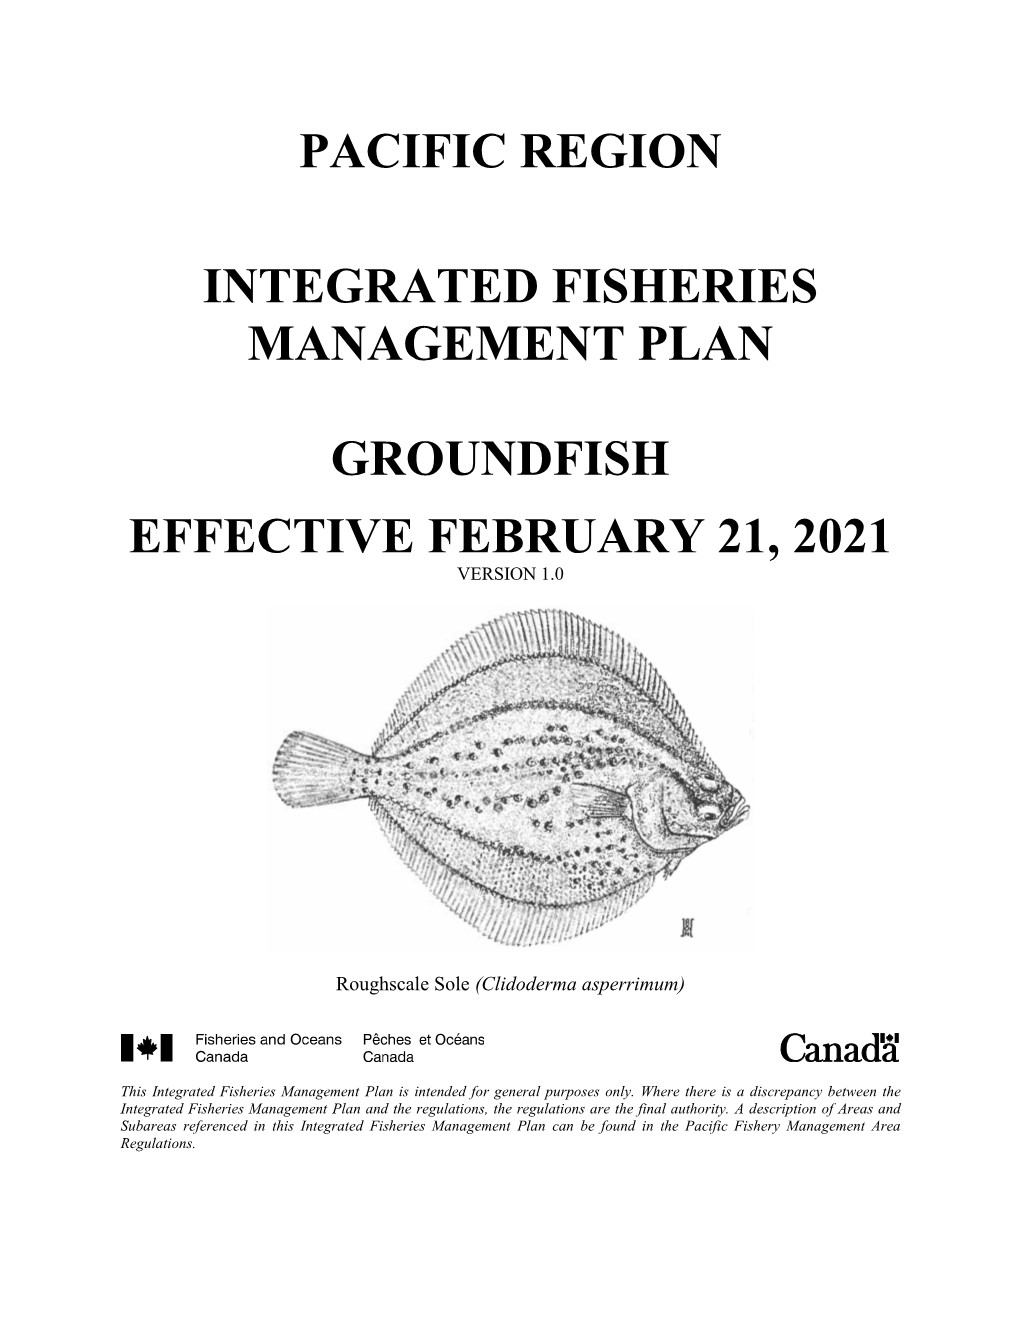 Pacific Region Integrated Fisheries Management Plan, Groundfish